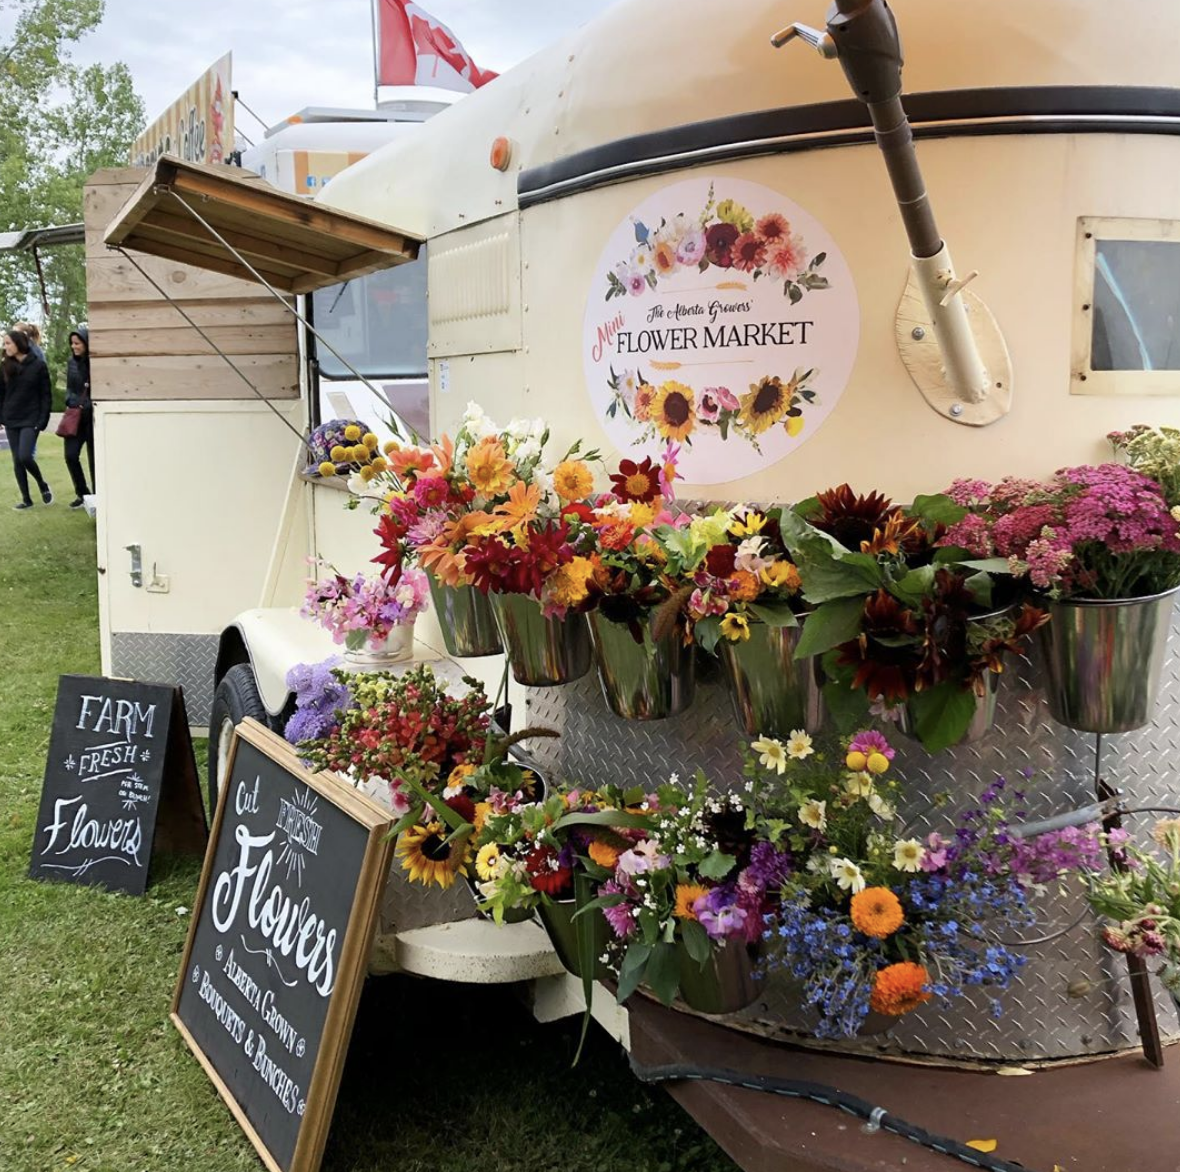 Adams converted an old horse trailer into a pop-up flower shop, pictured here at the Okotoks Farmer's Market